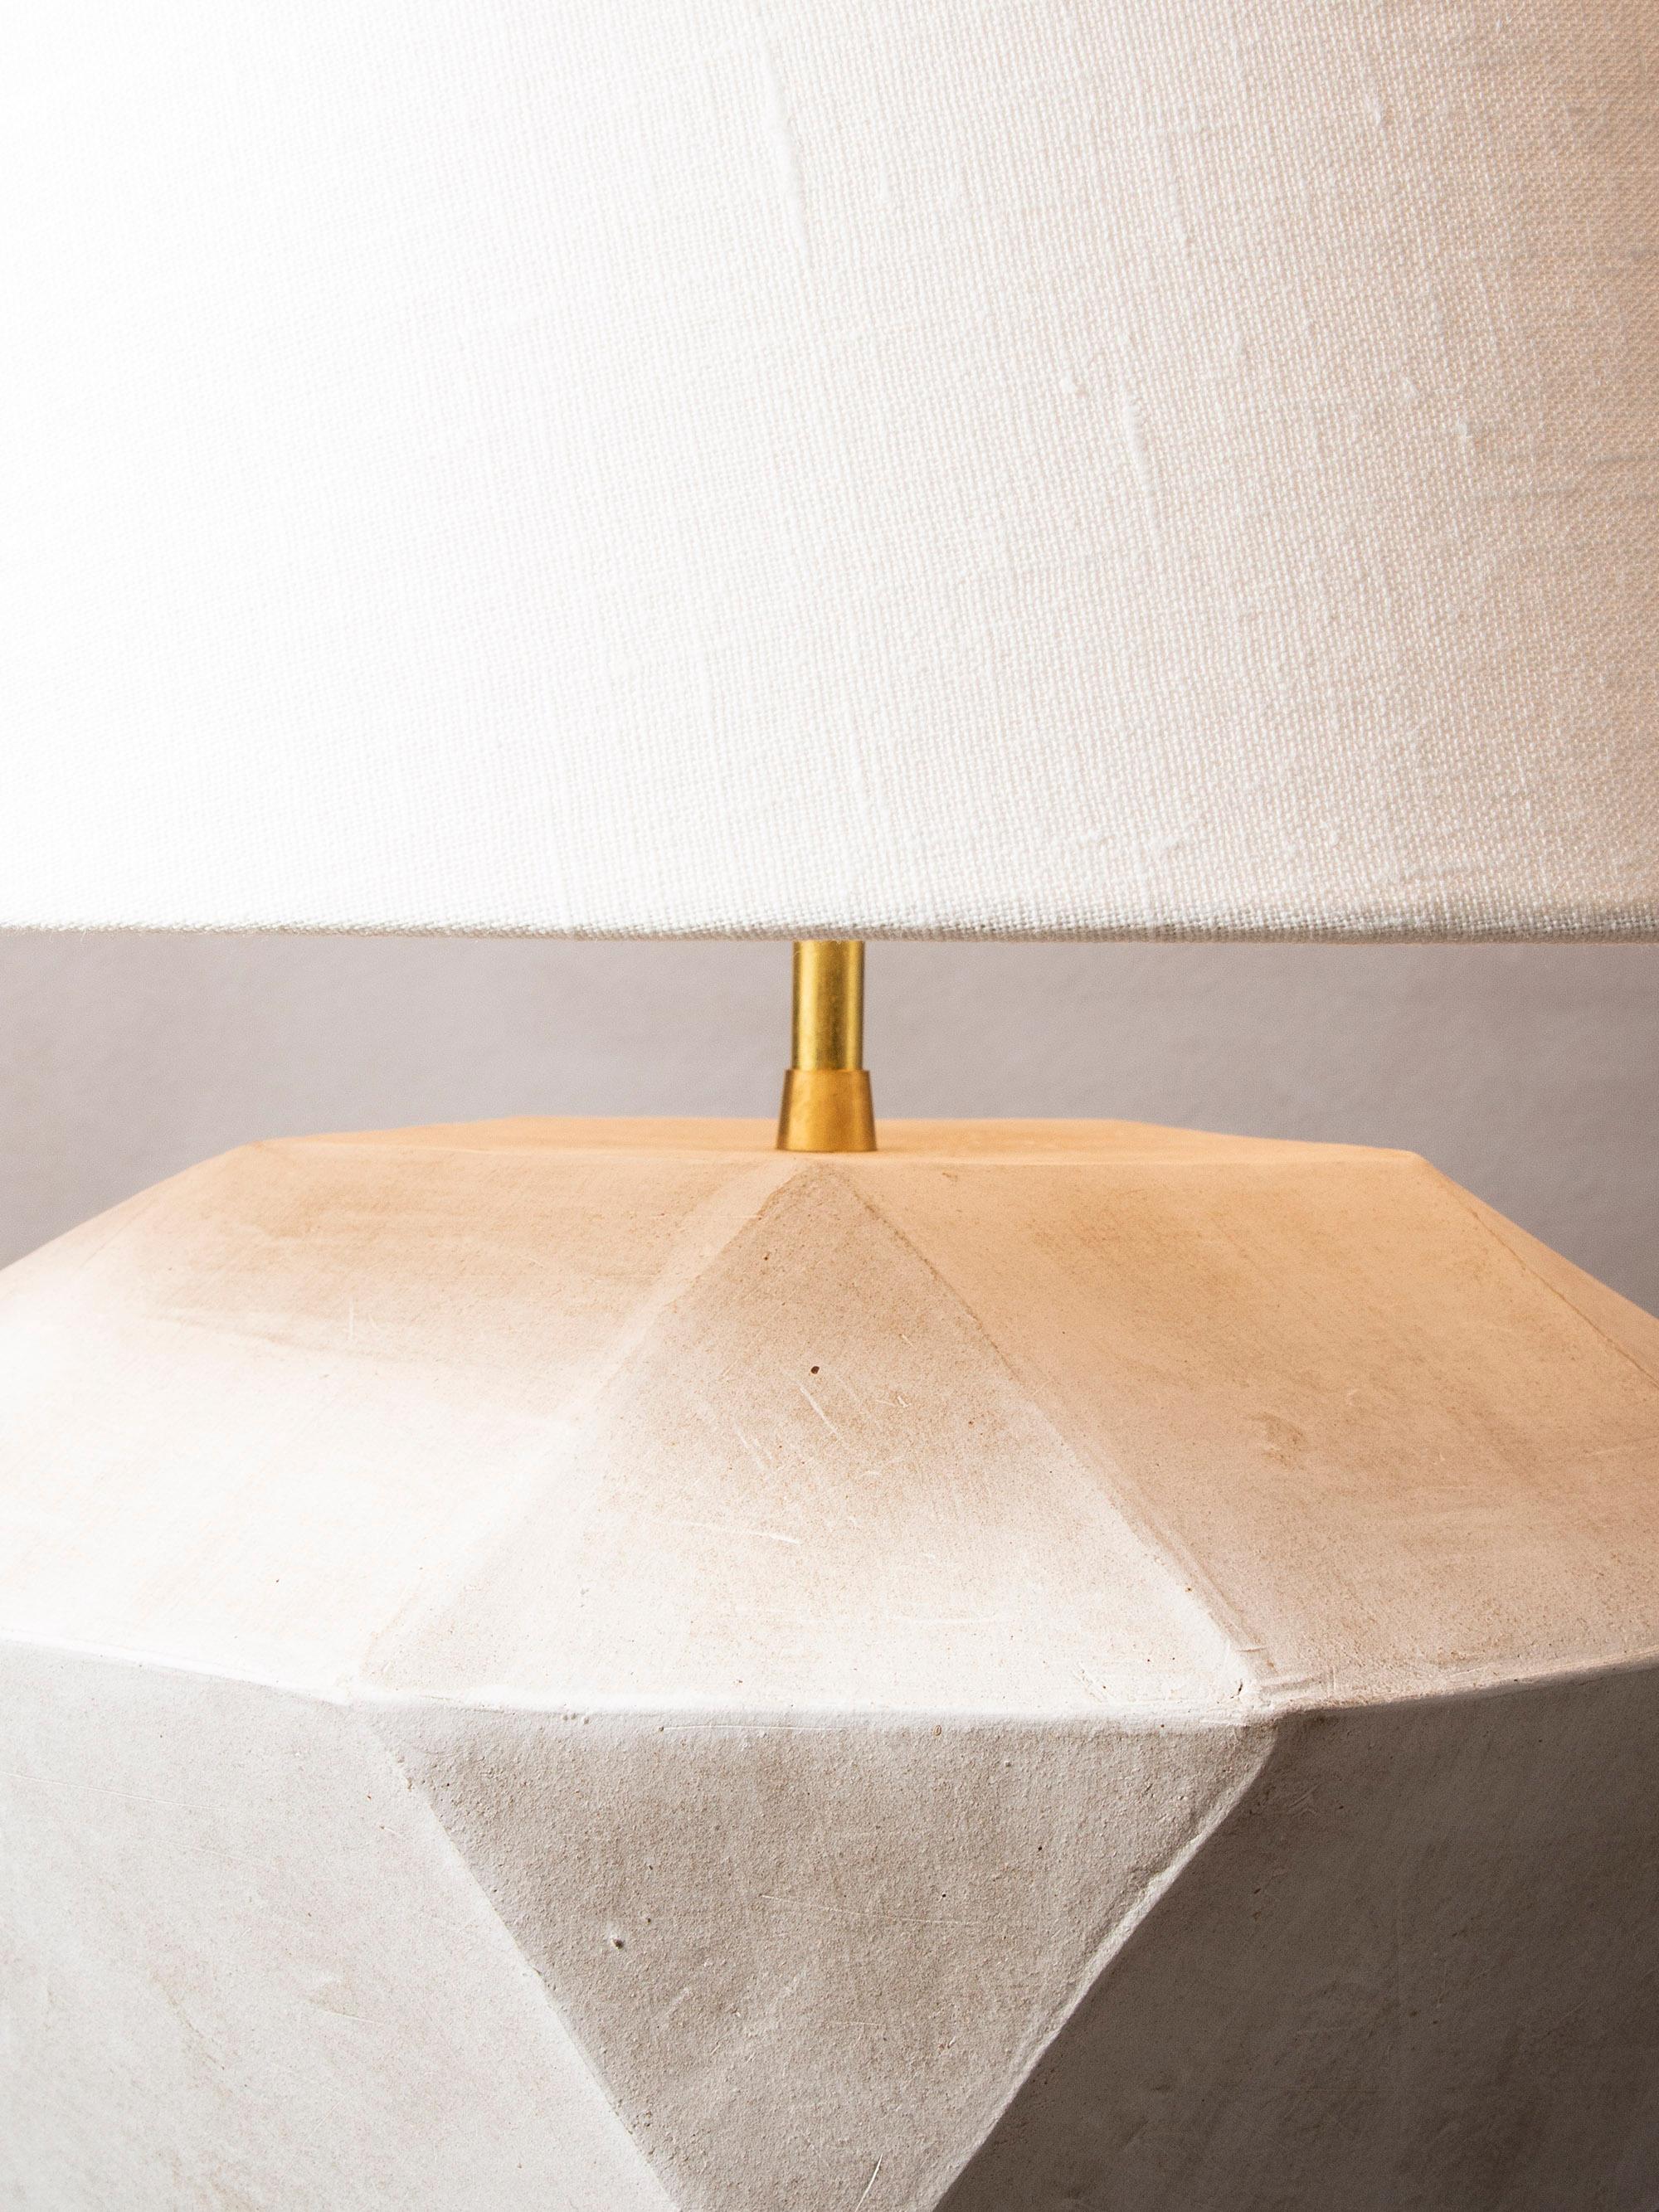 American Geode Lamp 2 - Geometric White Ceramic and Brass Table Lamp For Sale